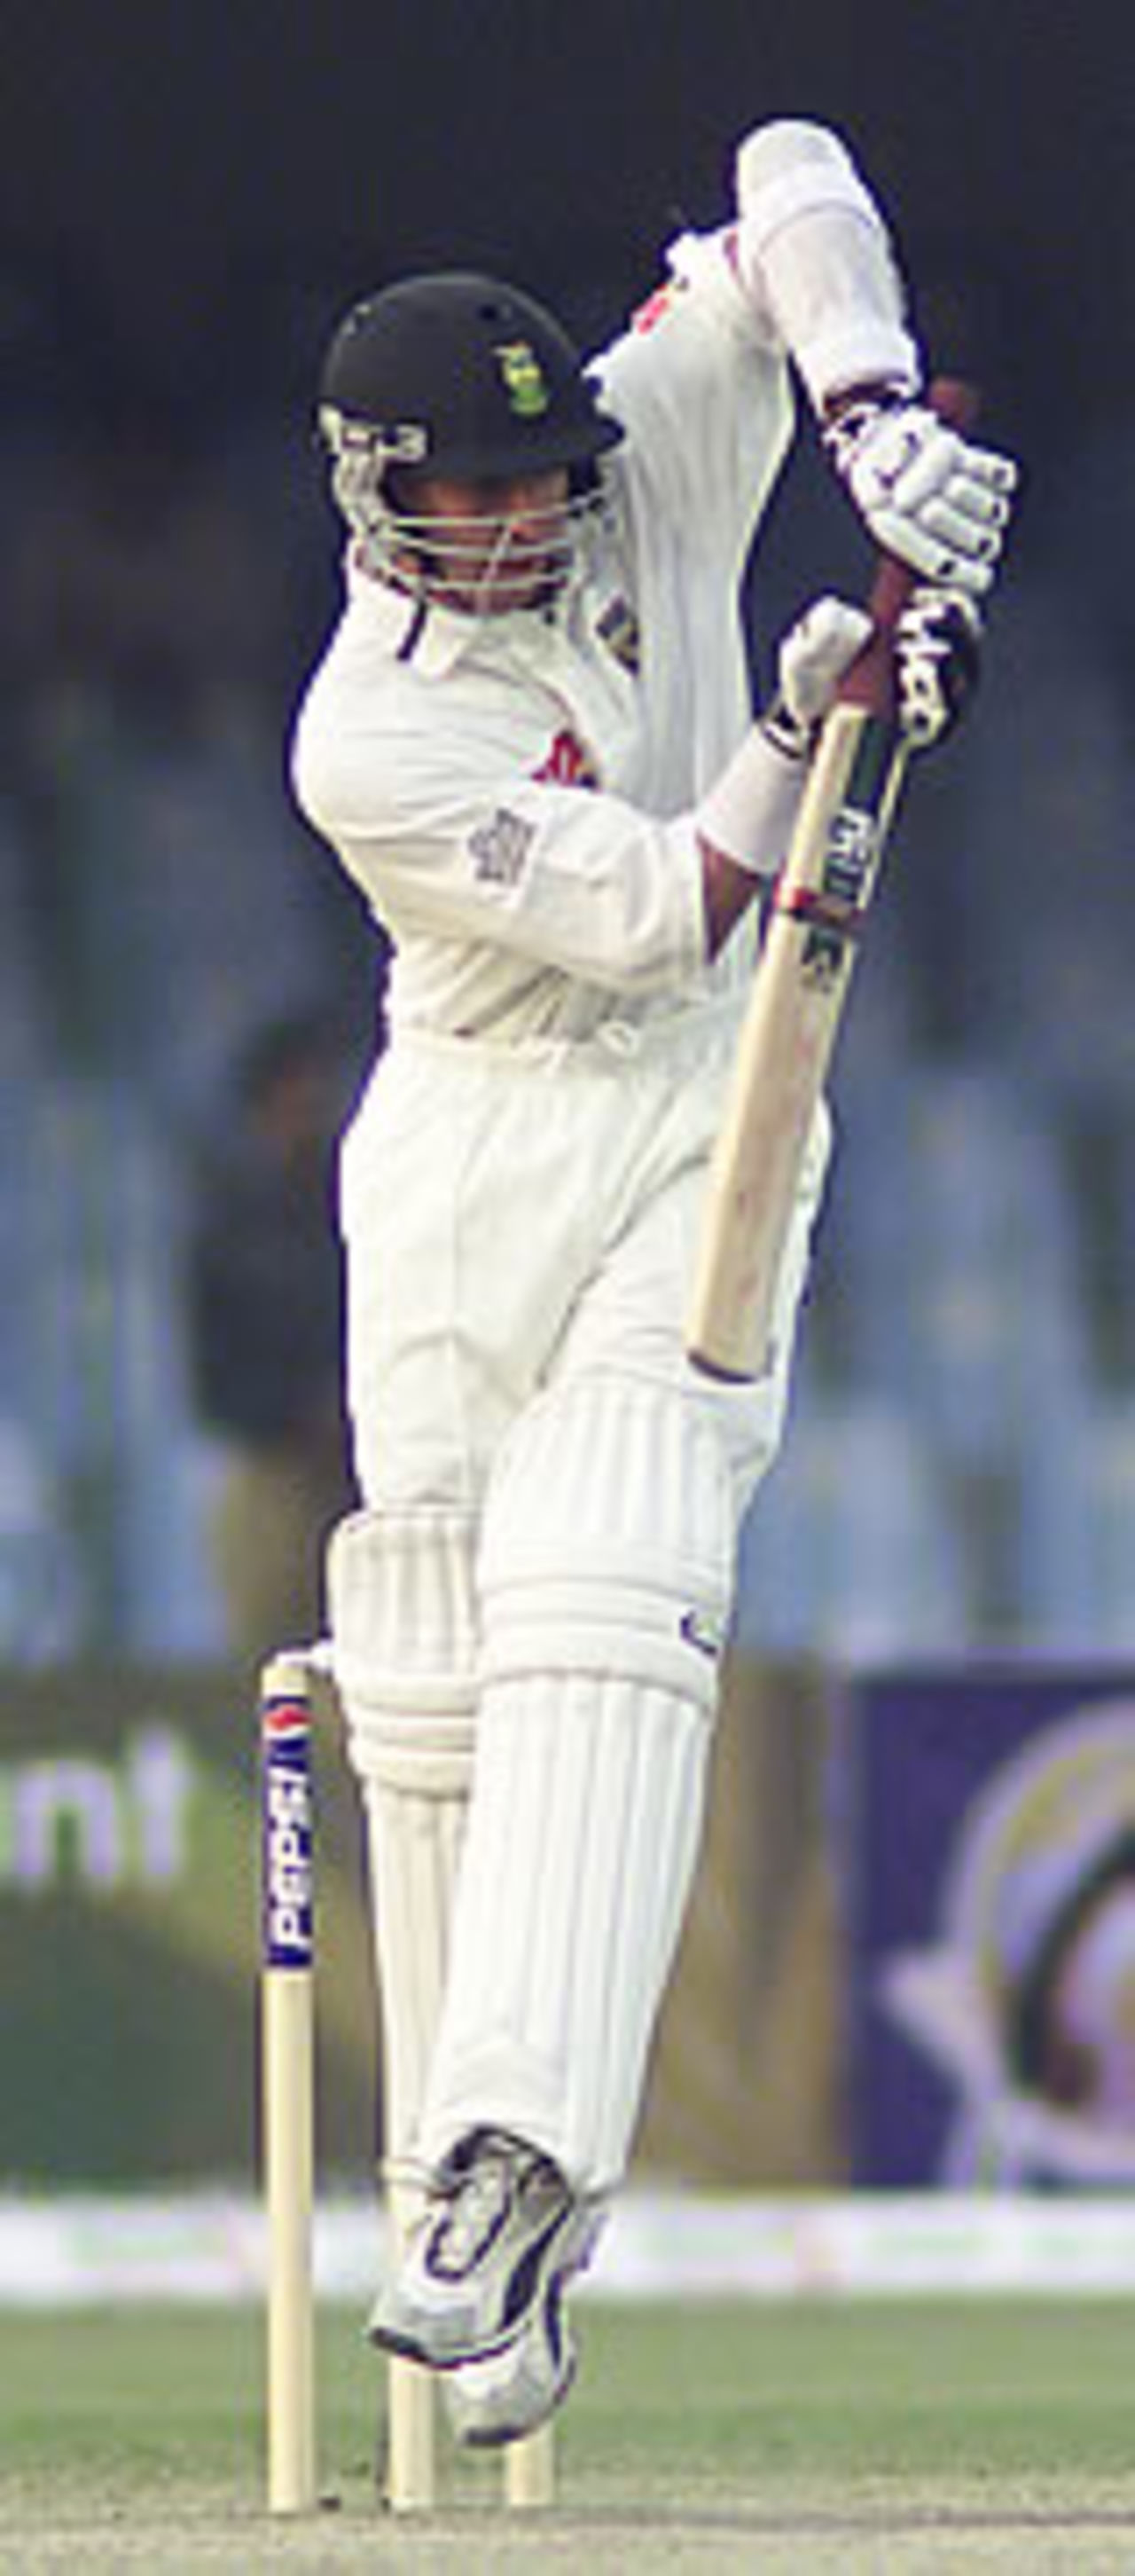 Boeta Dippenaar turns one to leg during his 25*, Pakistan v South Africa, Day 3, 1st Test, Lahore, October 19, 2003.